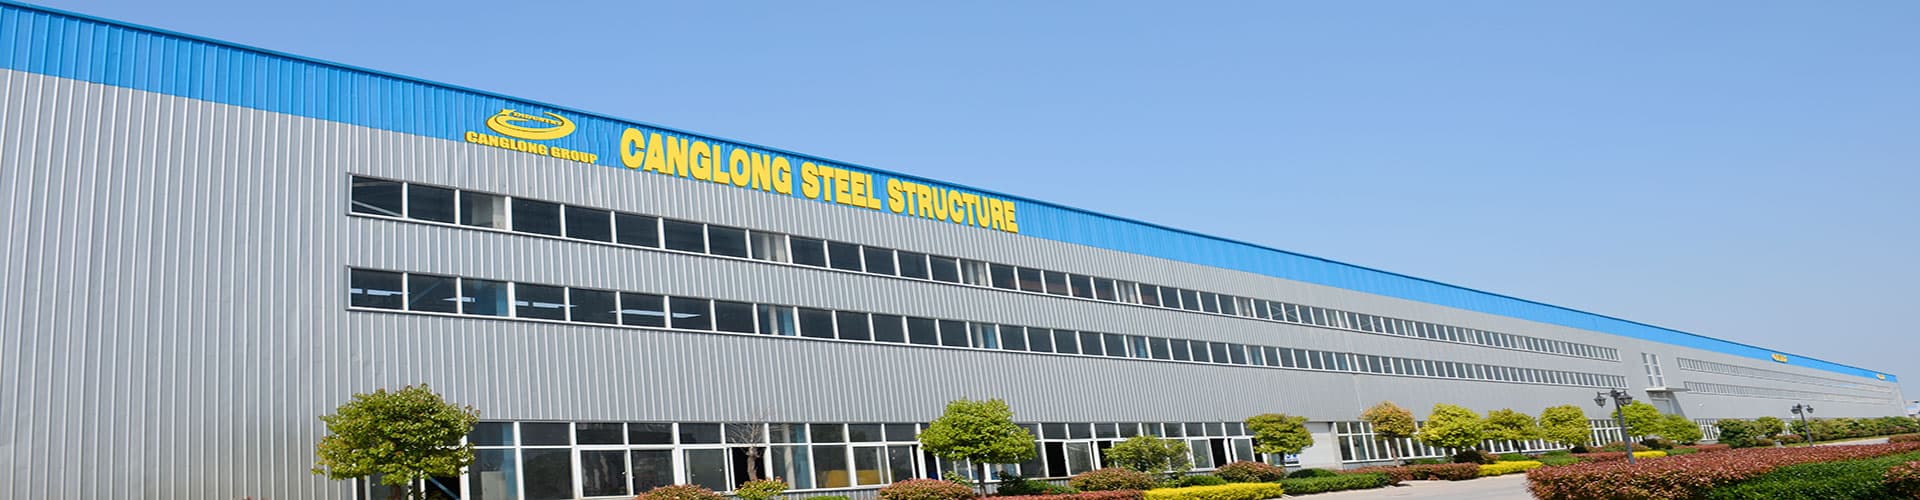 Steel Structure Company|Steel Structure information